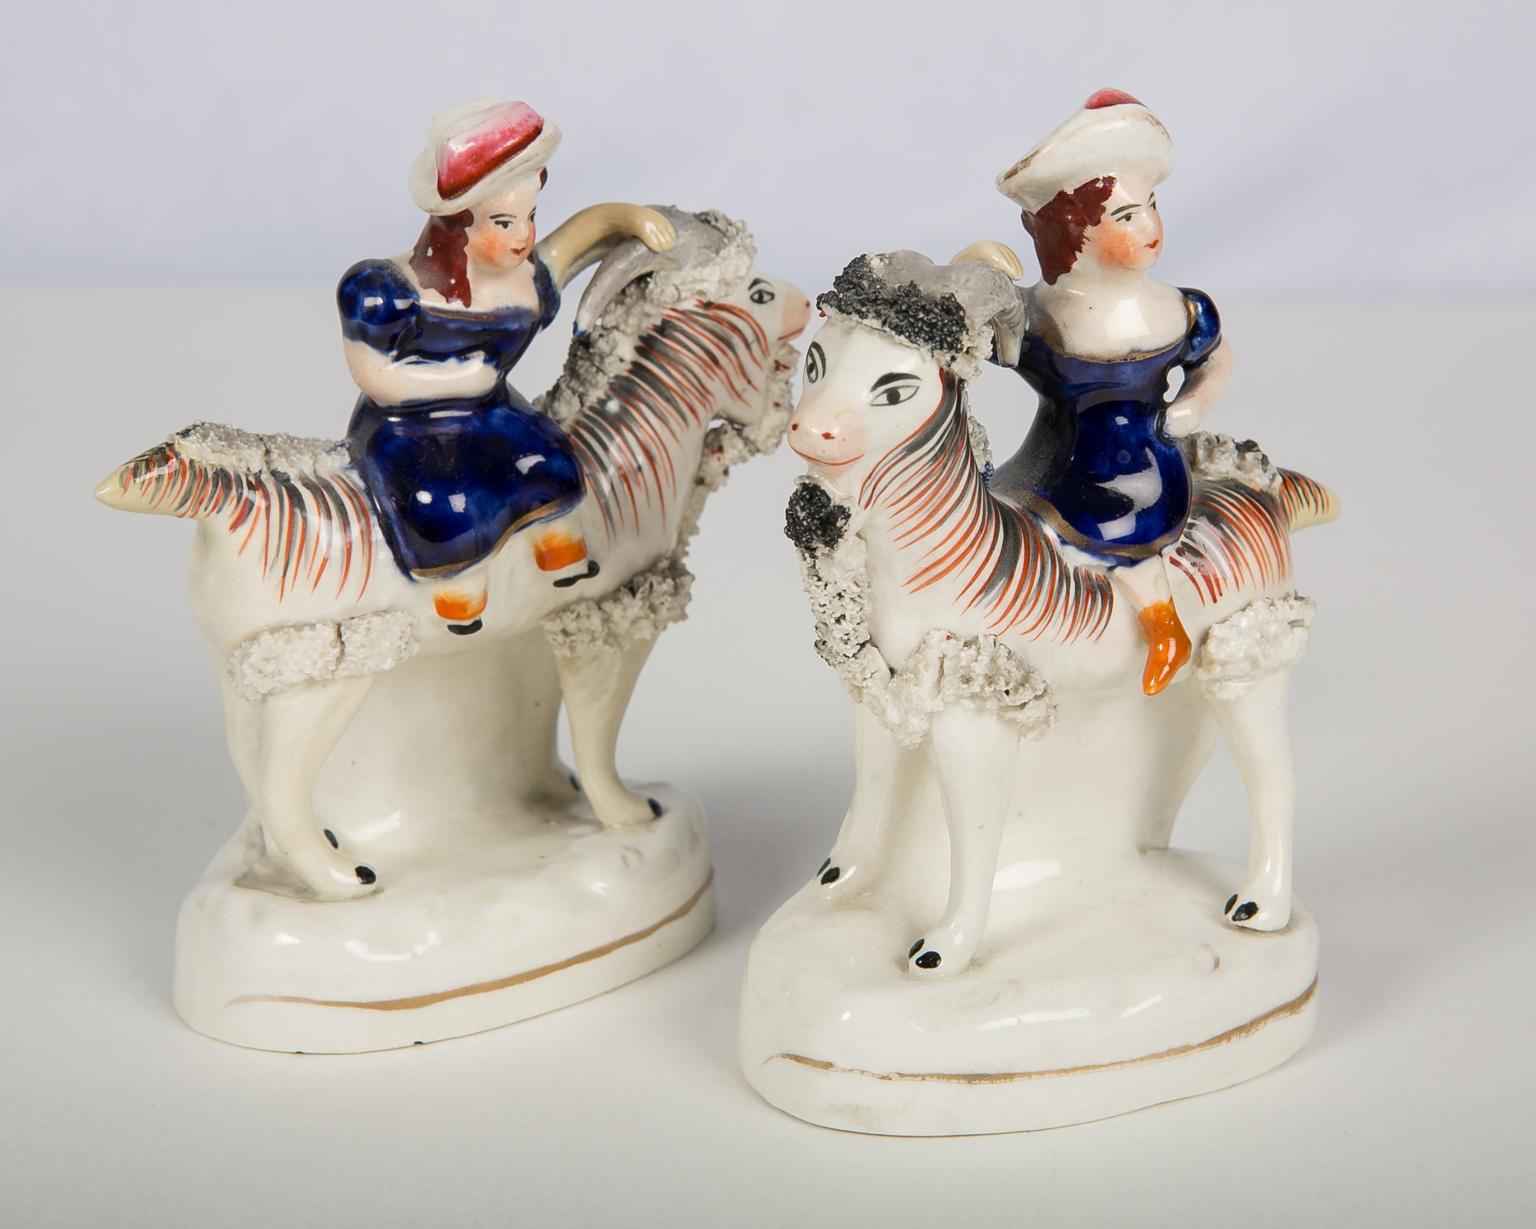 We are pleased to offer this pair of adorable Staffordshire figures of children, each riding a goat. The charming figures are 
painted with enamels of cobalt blue, pink and orange. Made circa 1880, the bases are oval shaped with a thin gold line